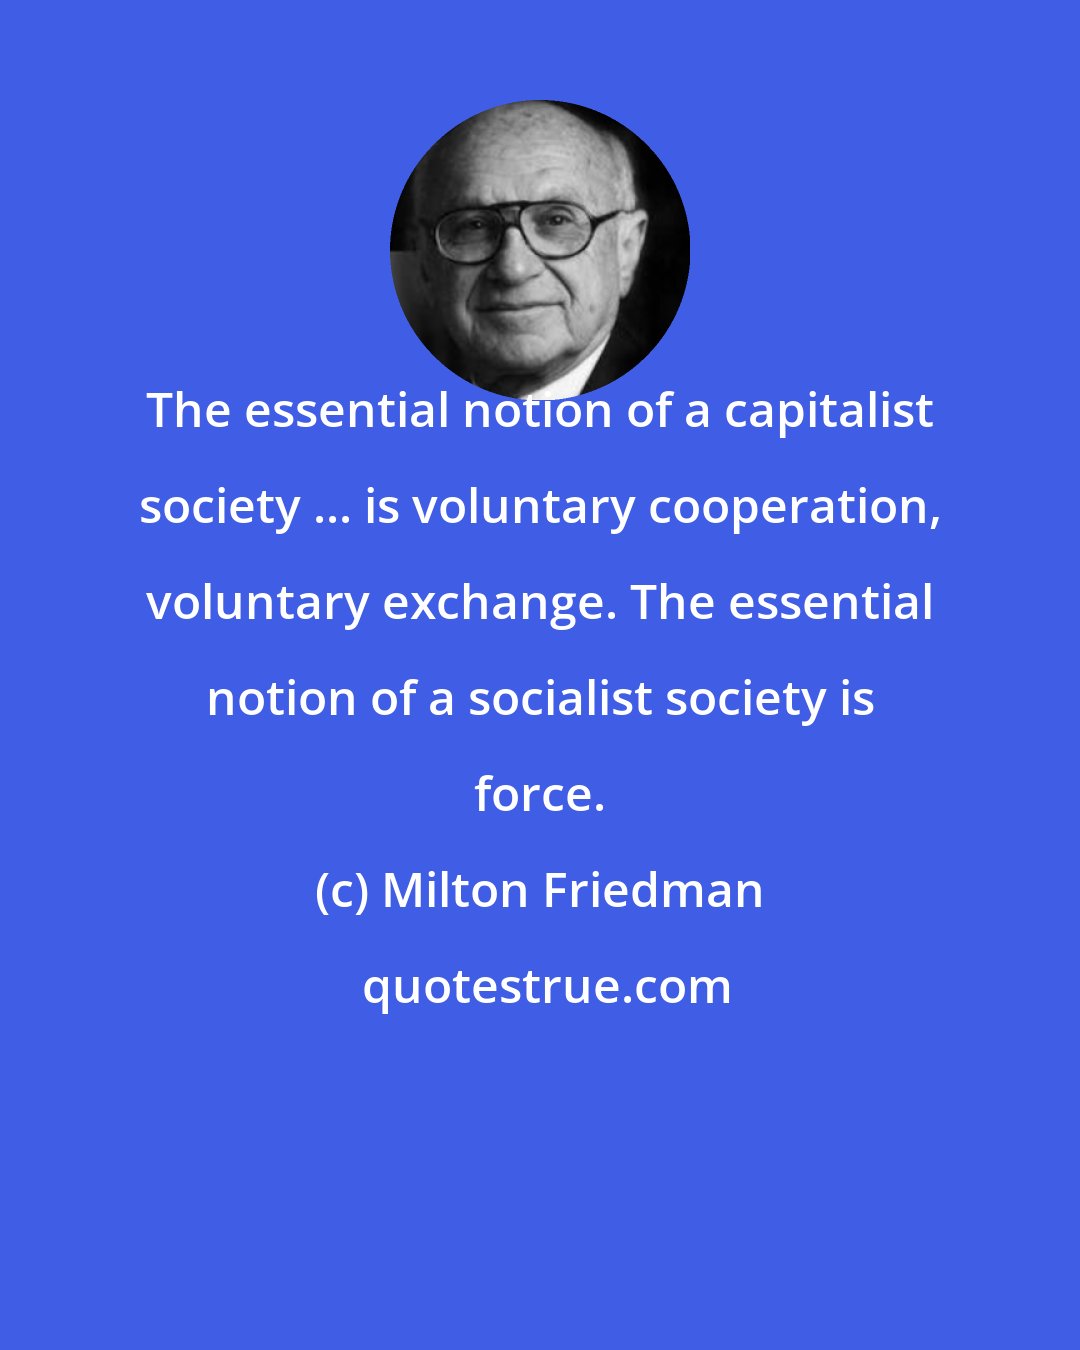 Milton Friedman: The essential notion of a capitalist society ... is voluntary cooperation, voluntary exchange. The essential notion of a socialist society is force.